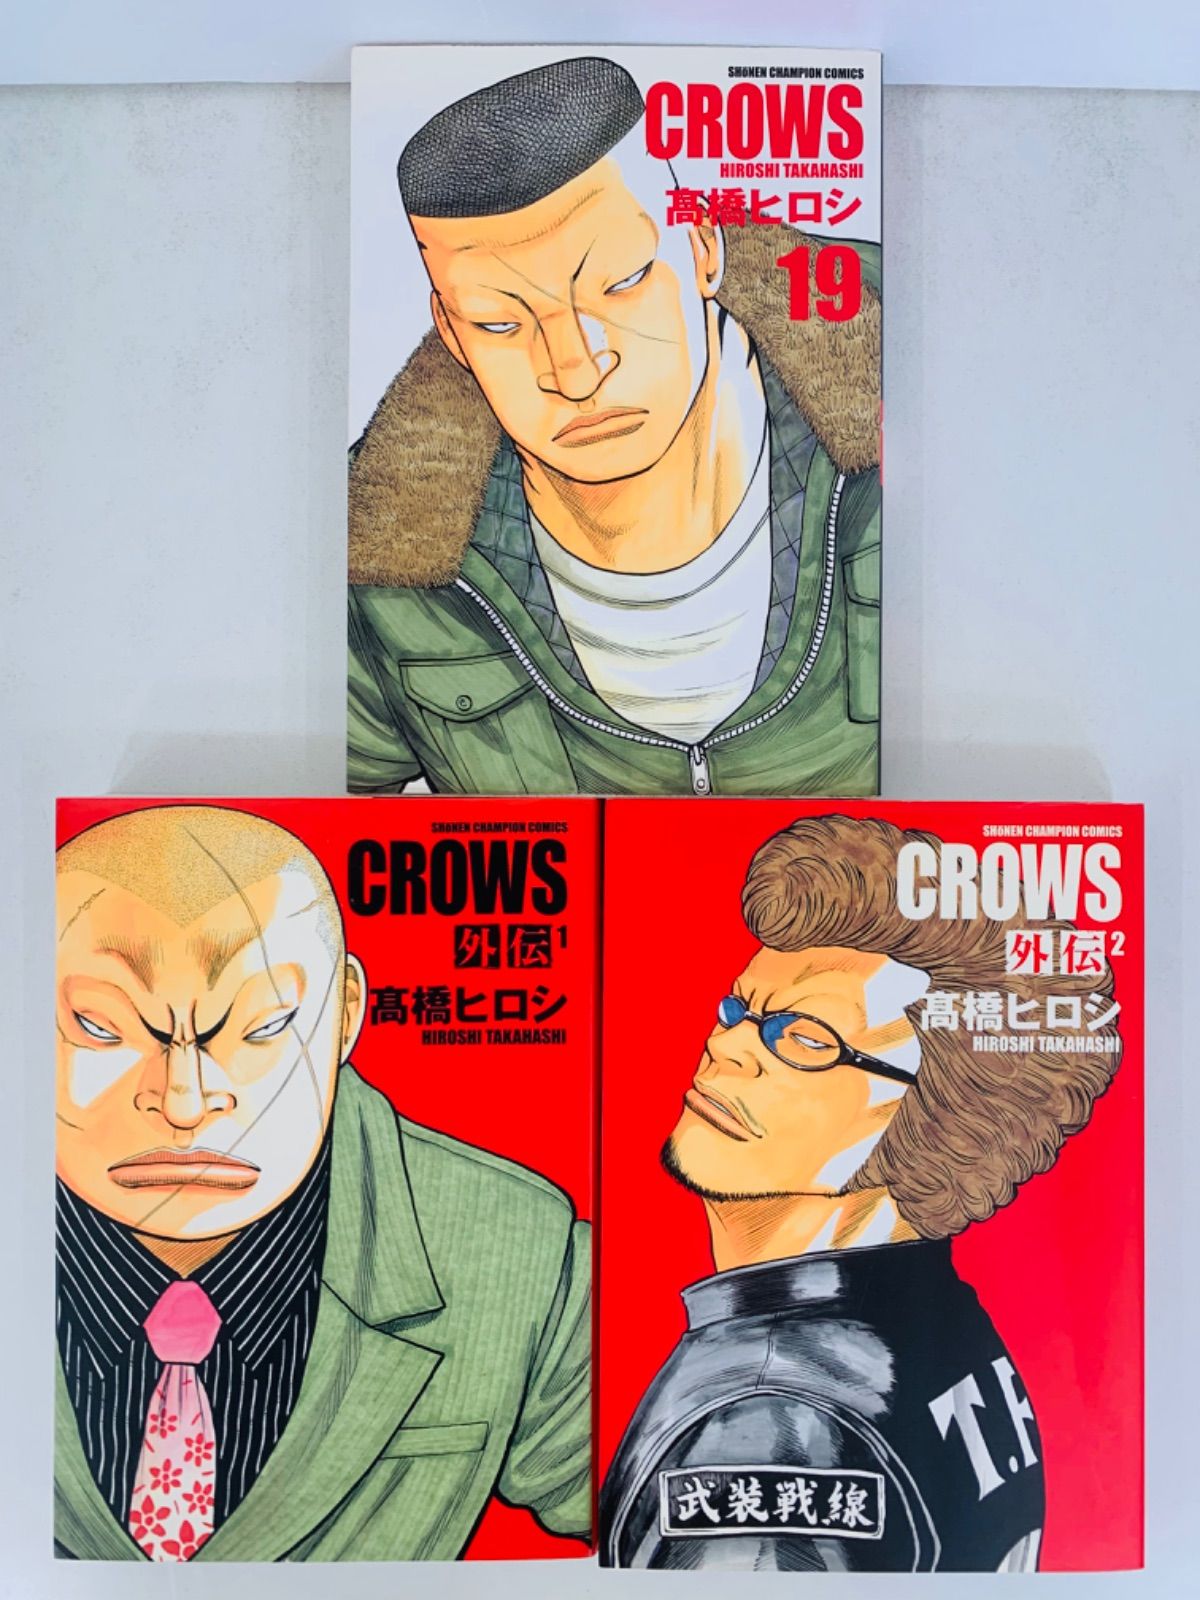 CROWS クローズ　全19巻+外伝セット